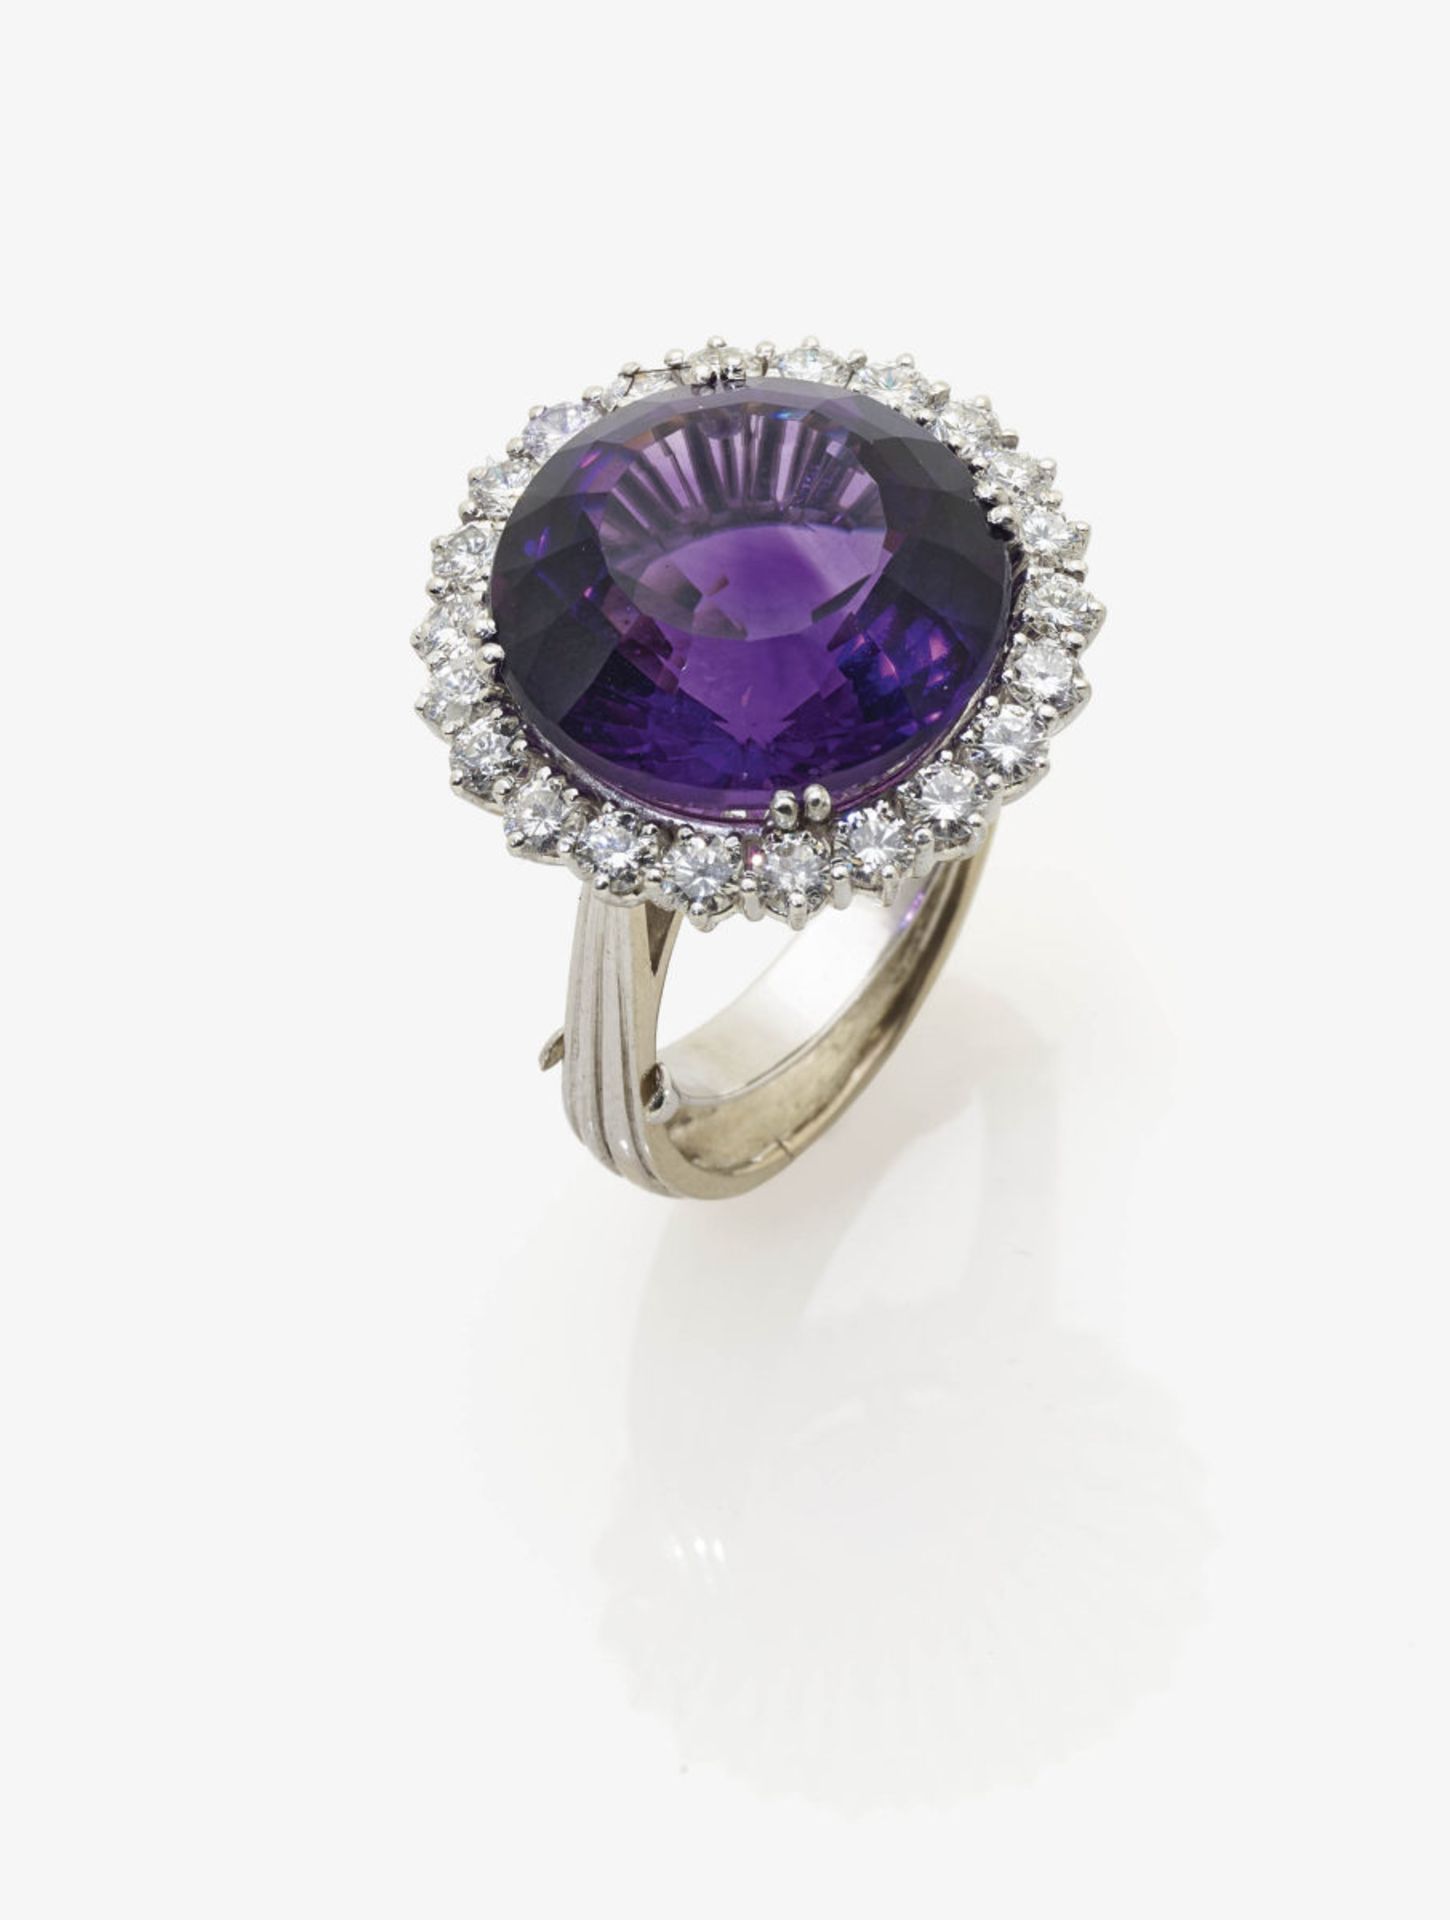 A Diamond and Amethyst Ring